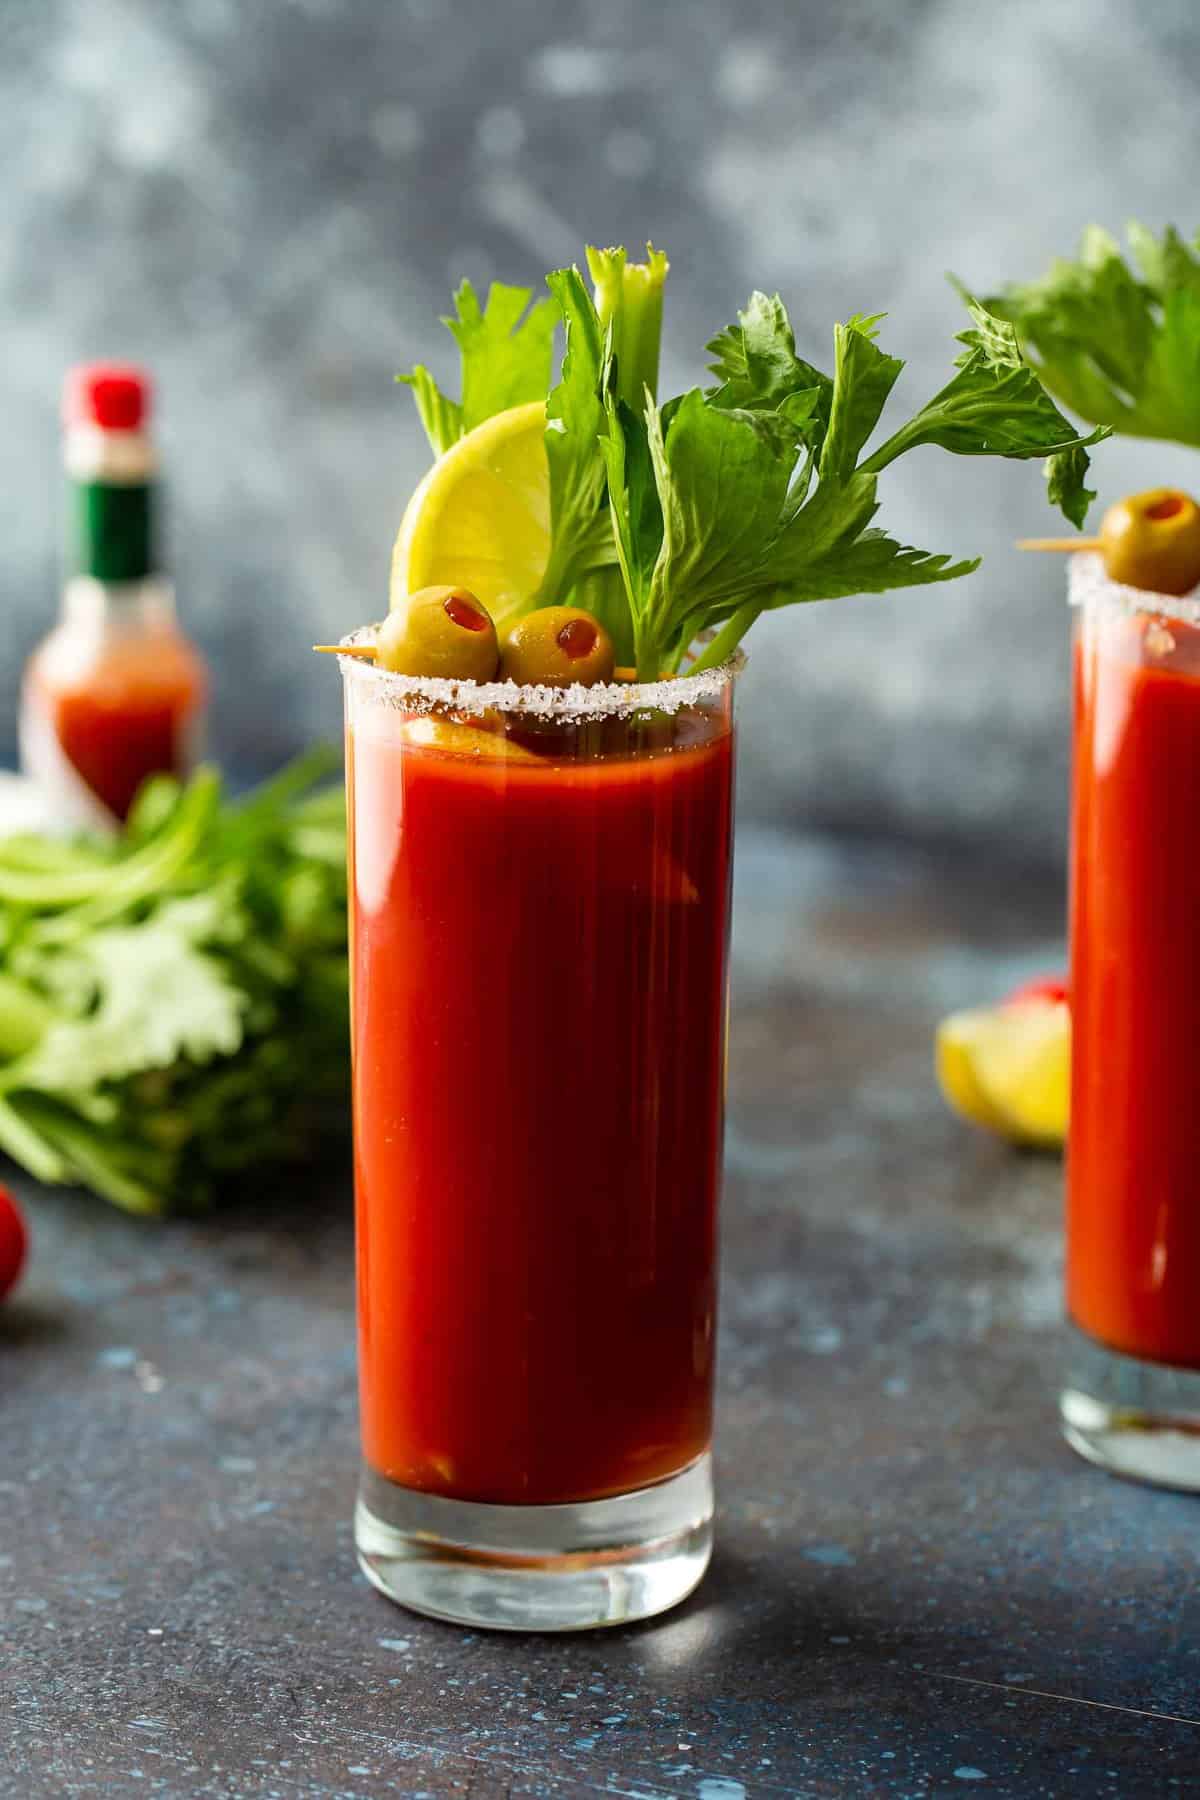 A classic Bloody Mary